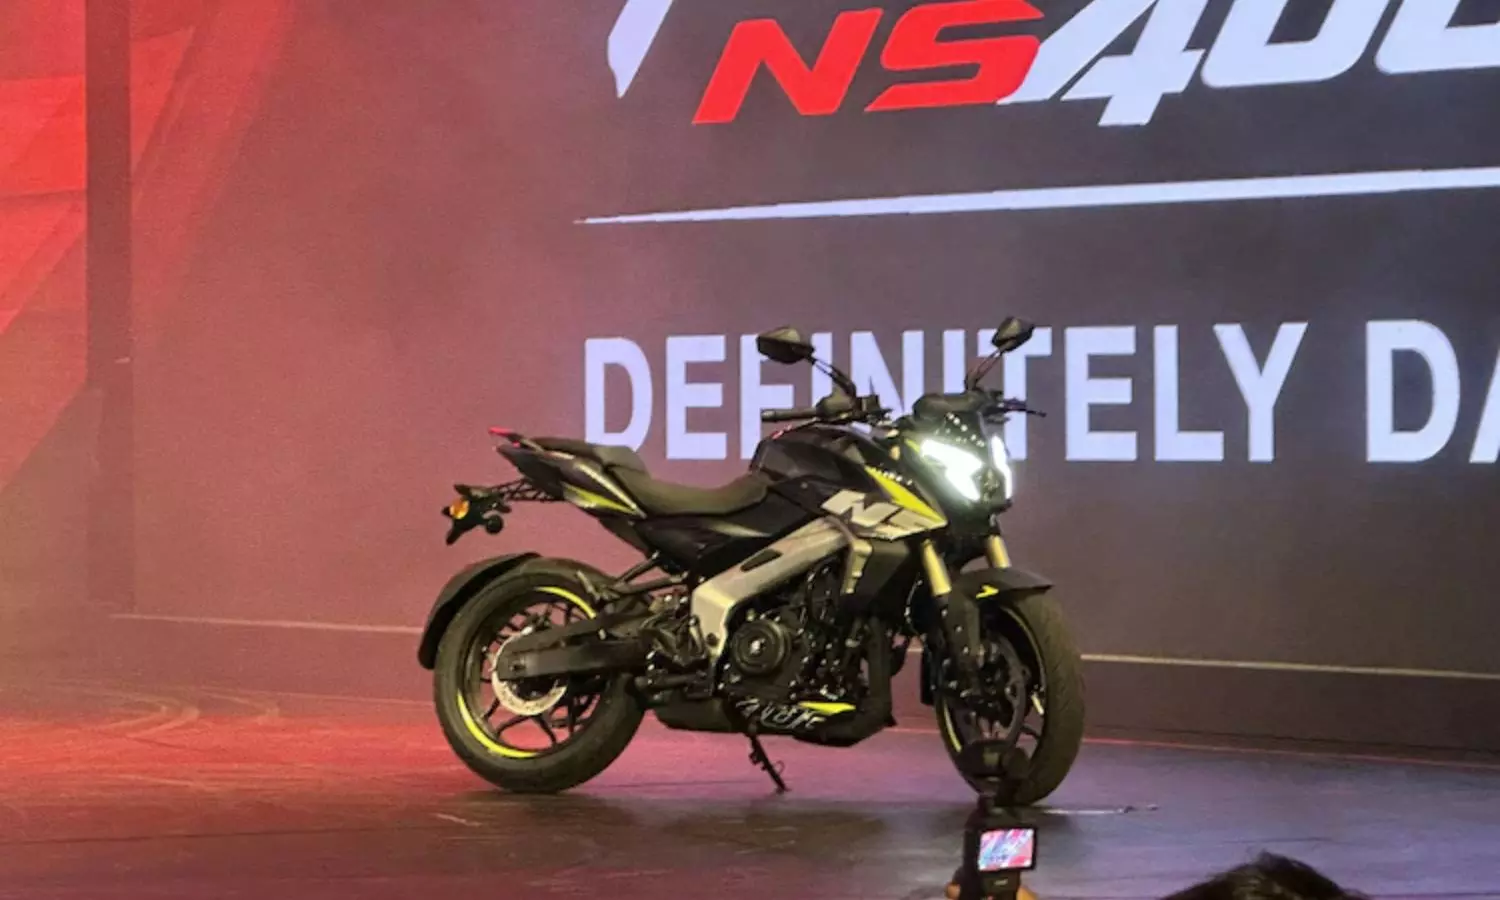 Bajaj Pulsar NS400Z Launched In India At ₹ 1.85 Lakh